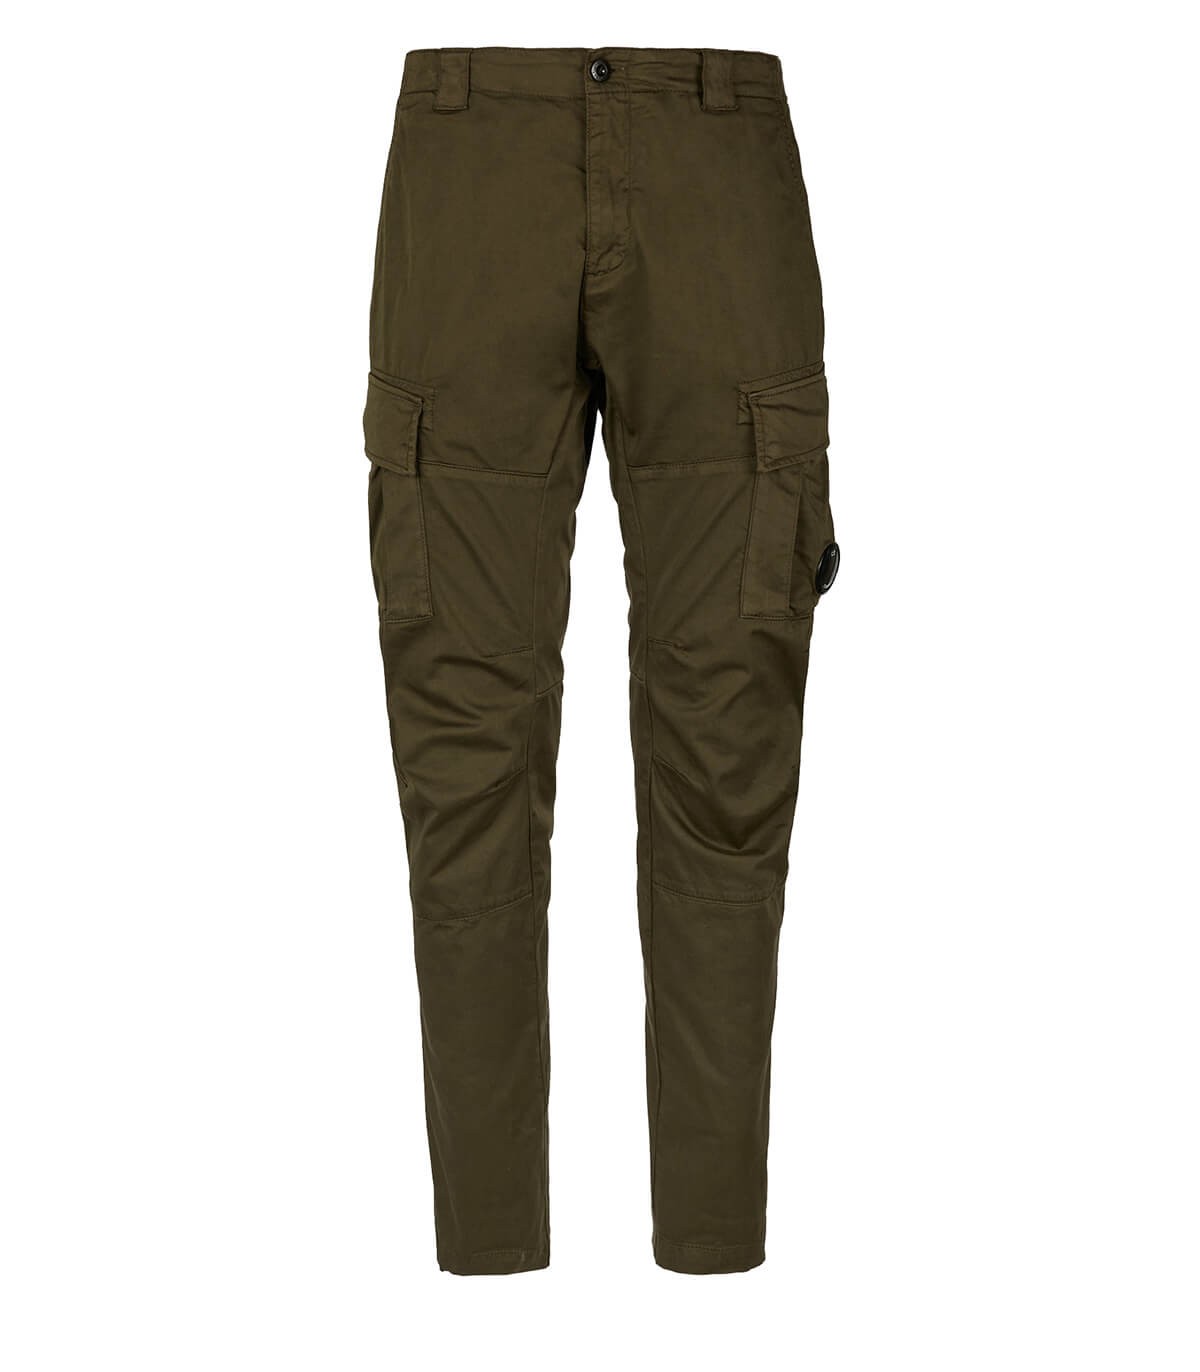 C.P. COMPANY CARGO STRETCH SATEEN LENS MILITARY GREEN PANTS